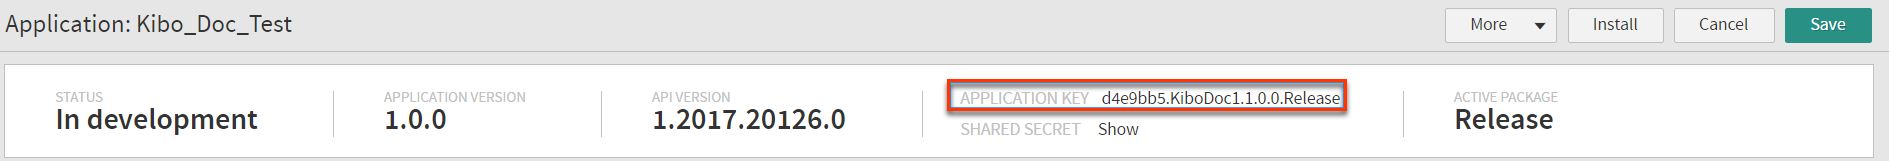 Application ID and Shared Secret details on Application page